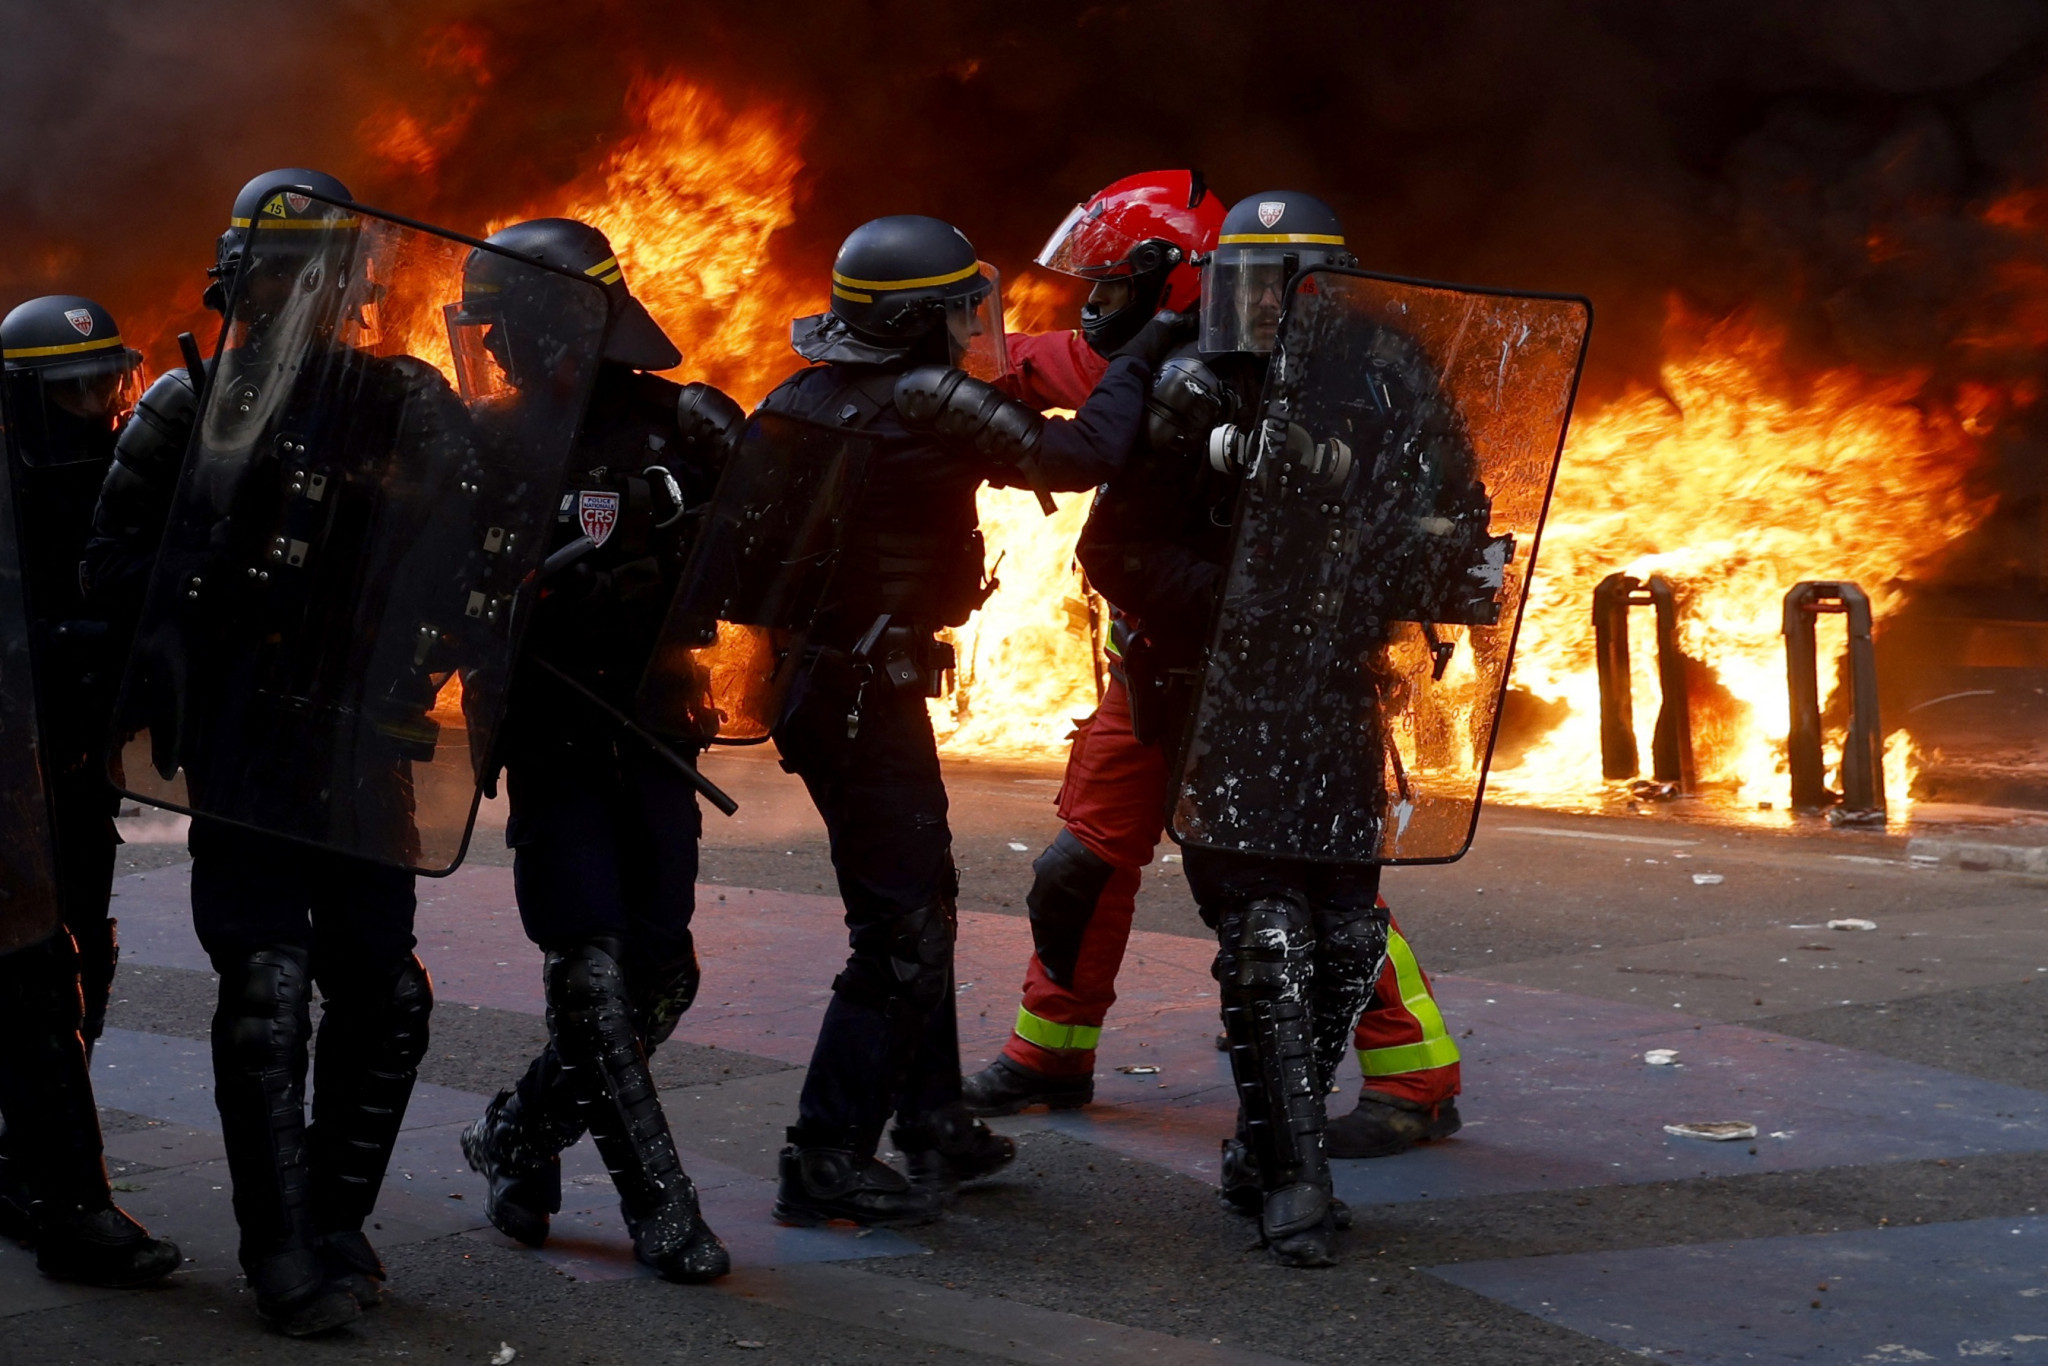 Protesters detained and police officers injured in violent clashes in Paris over pension reforms